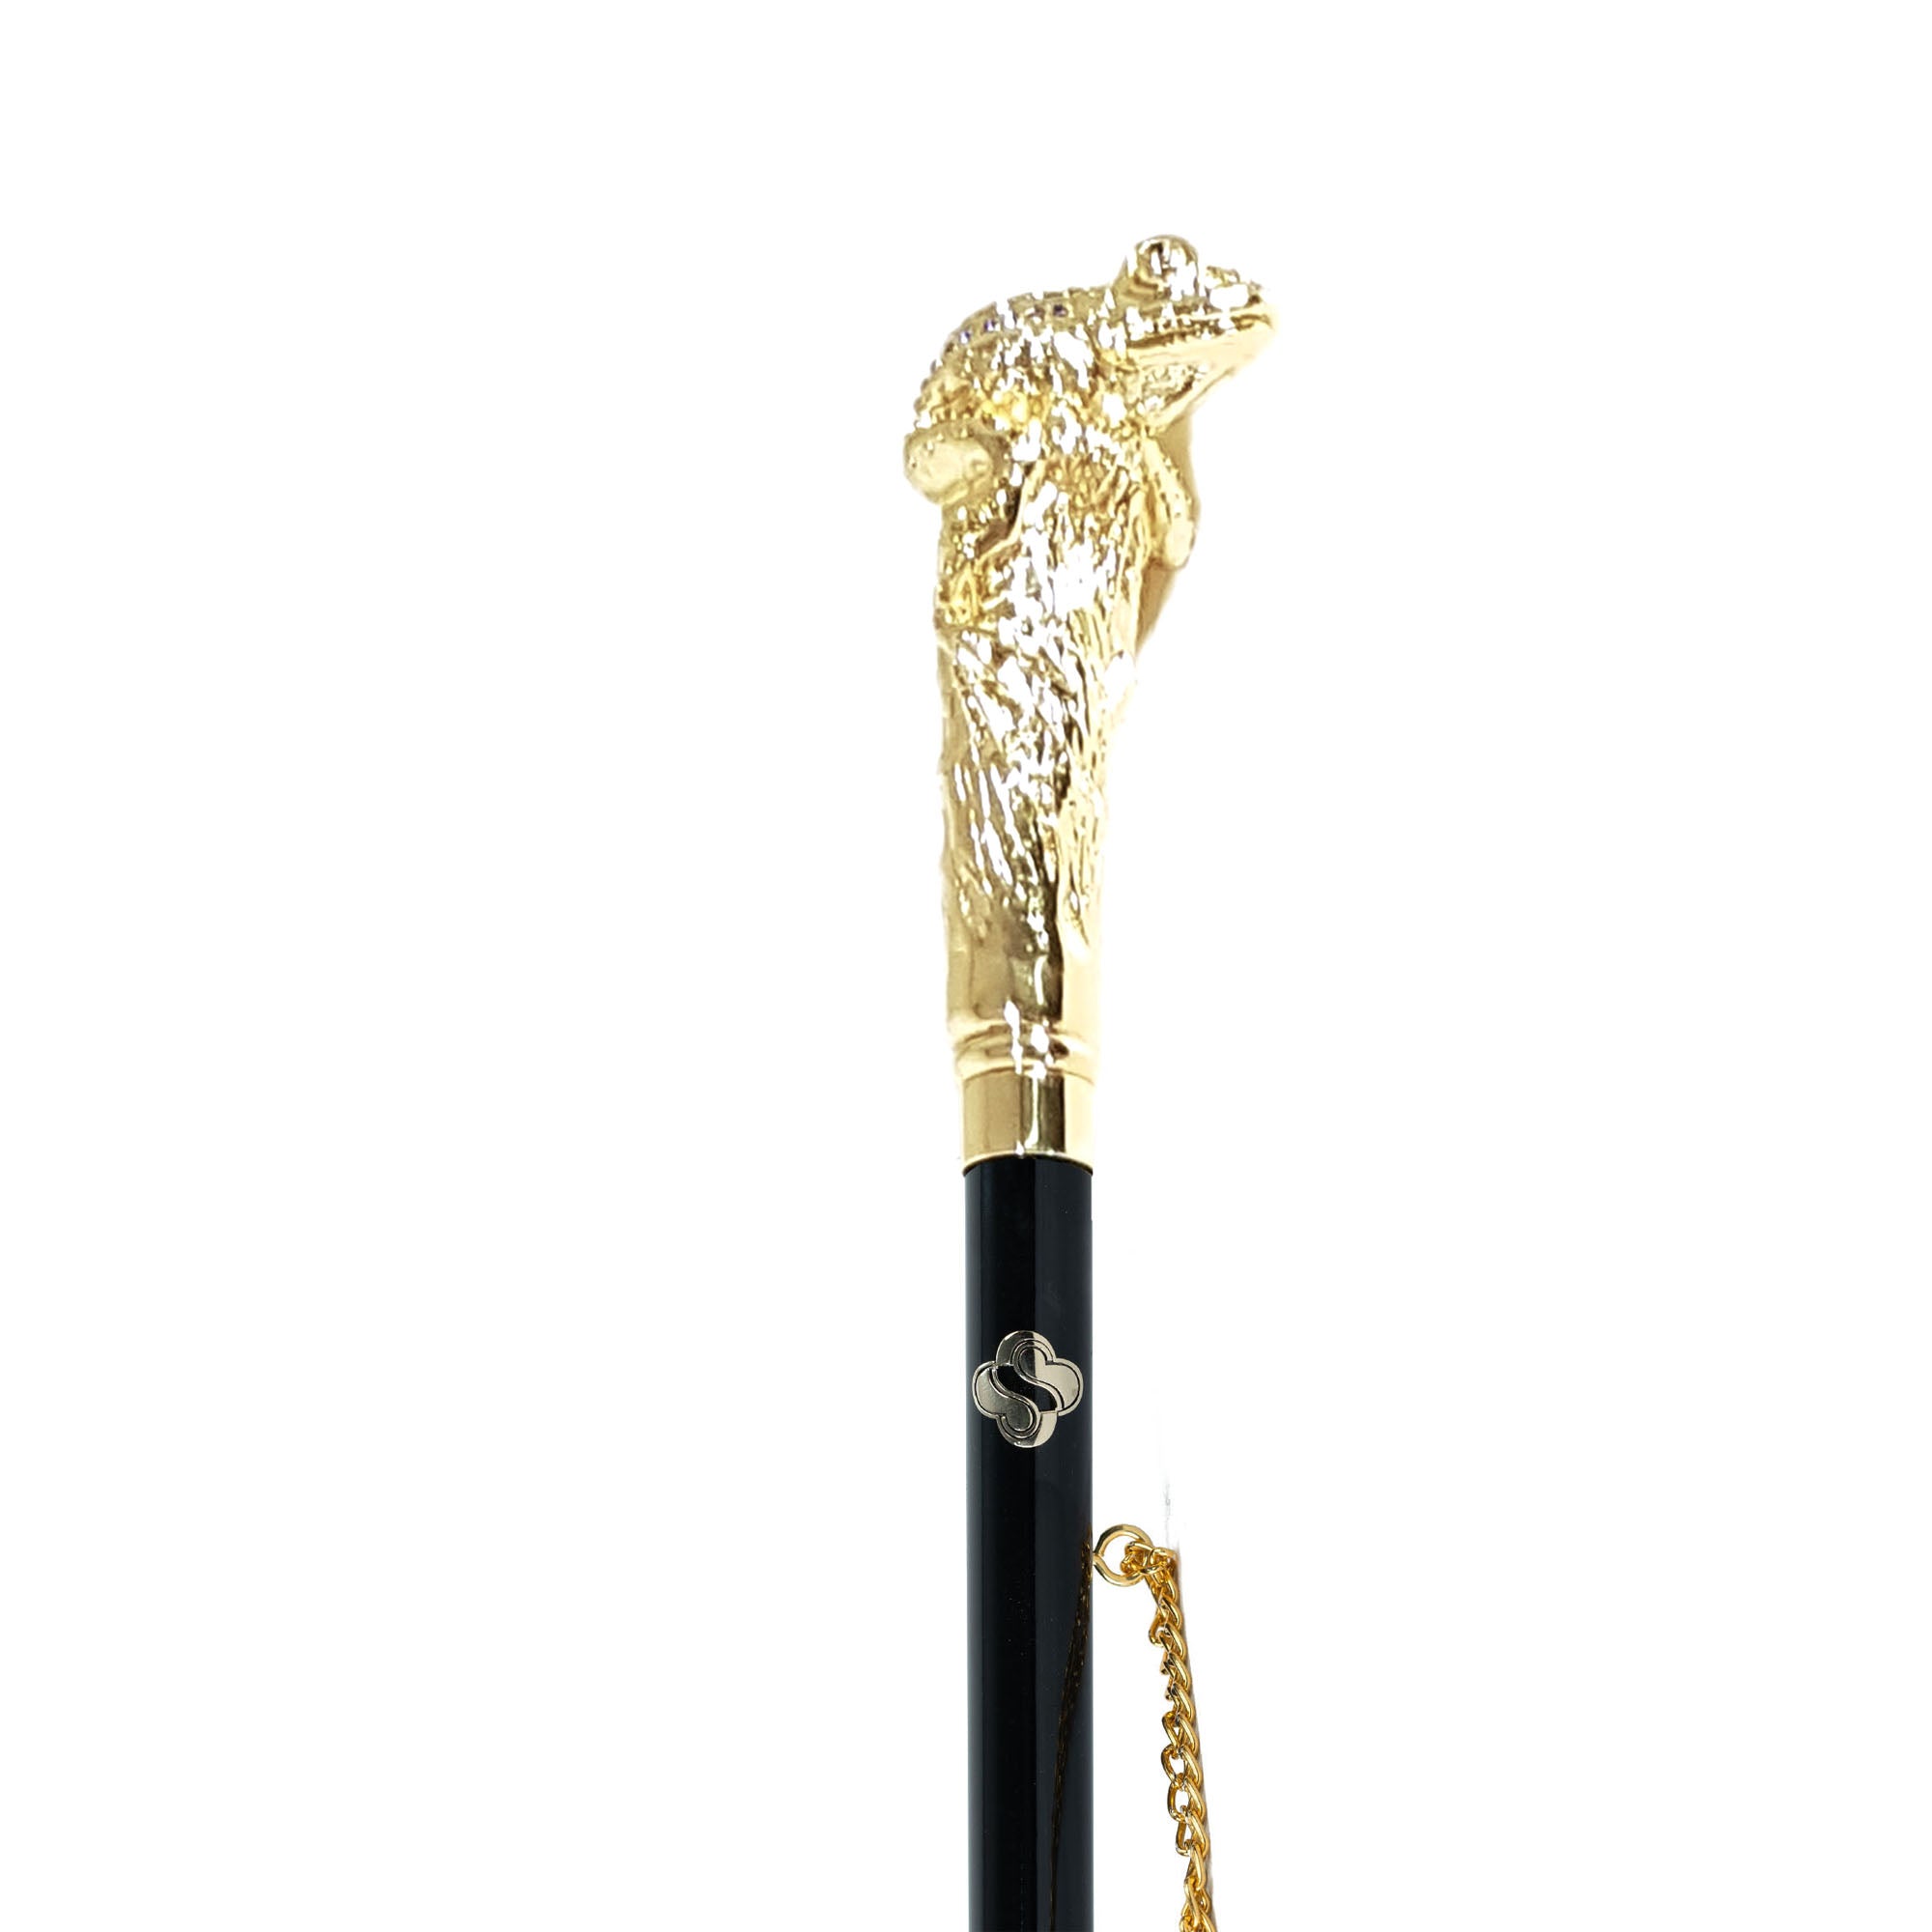 Leap into Luxury: Frog-Handled Shoehorn with Artistic Flair - Sapphire crystals